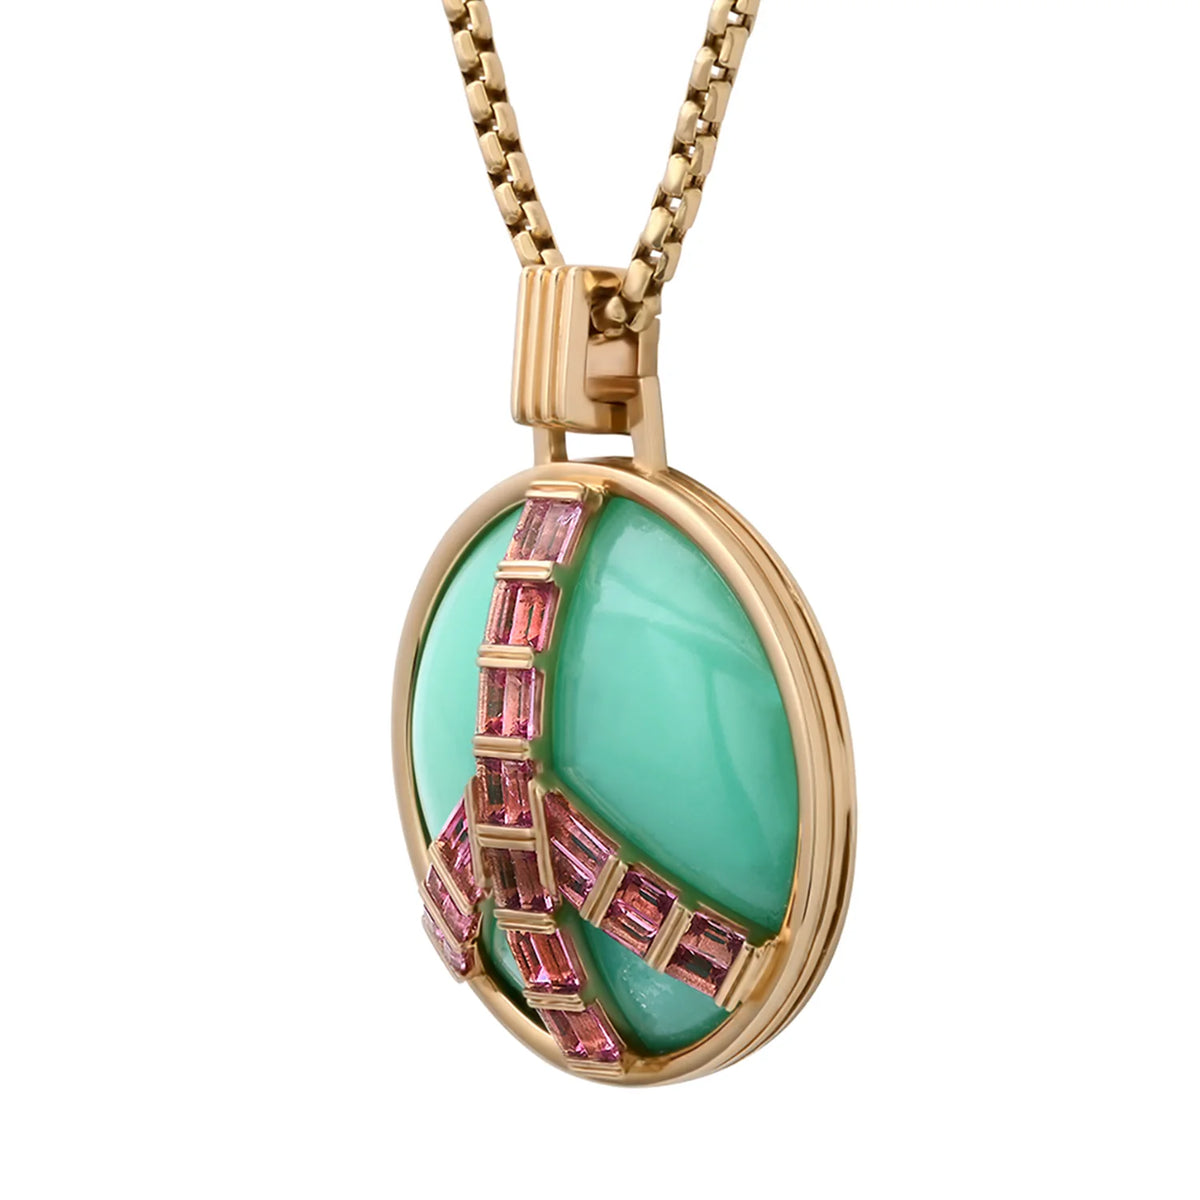 Grandsize Peace Necklace in Chrysoprase and Pink Tourmaline